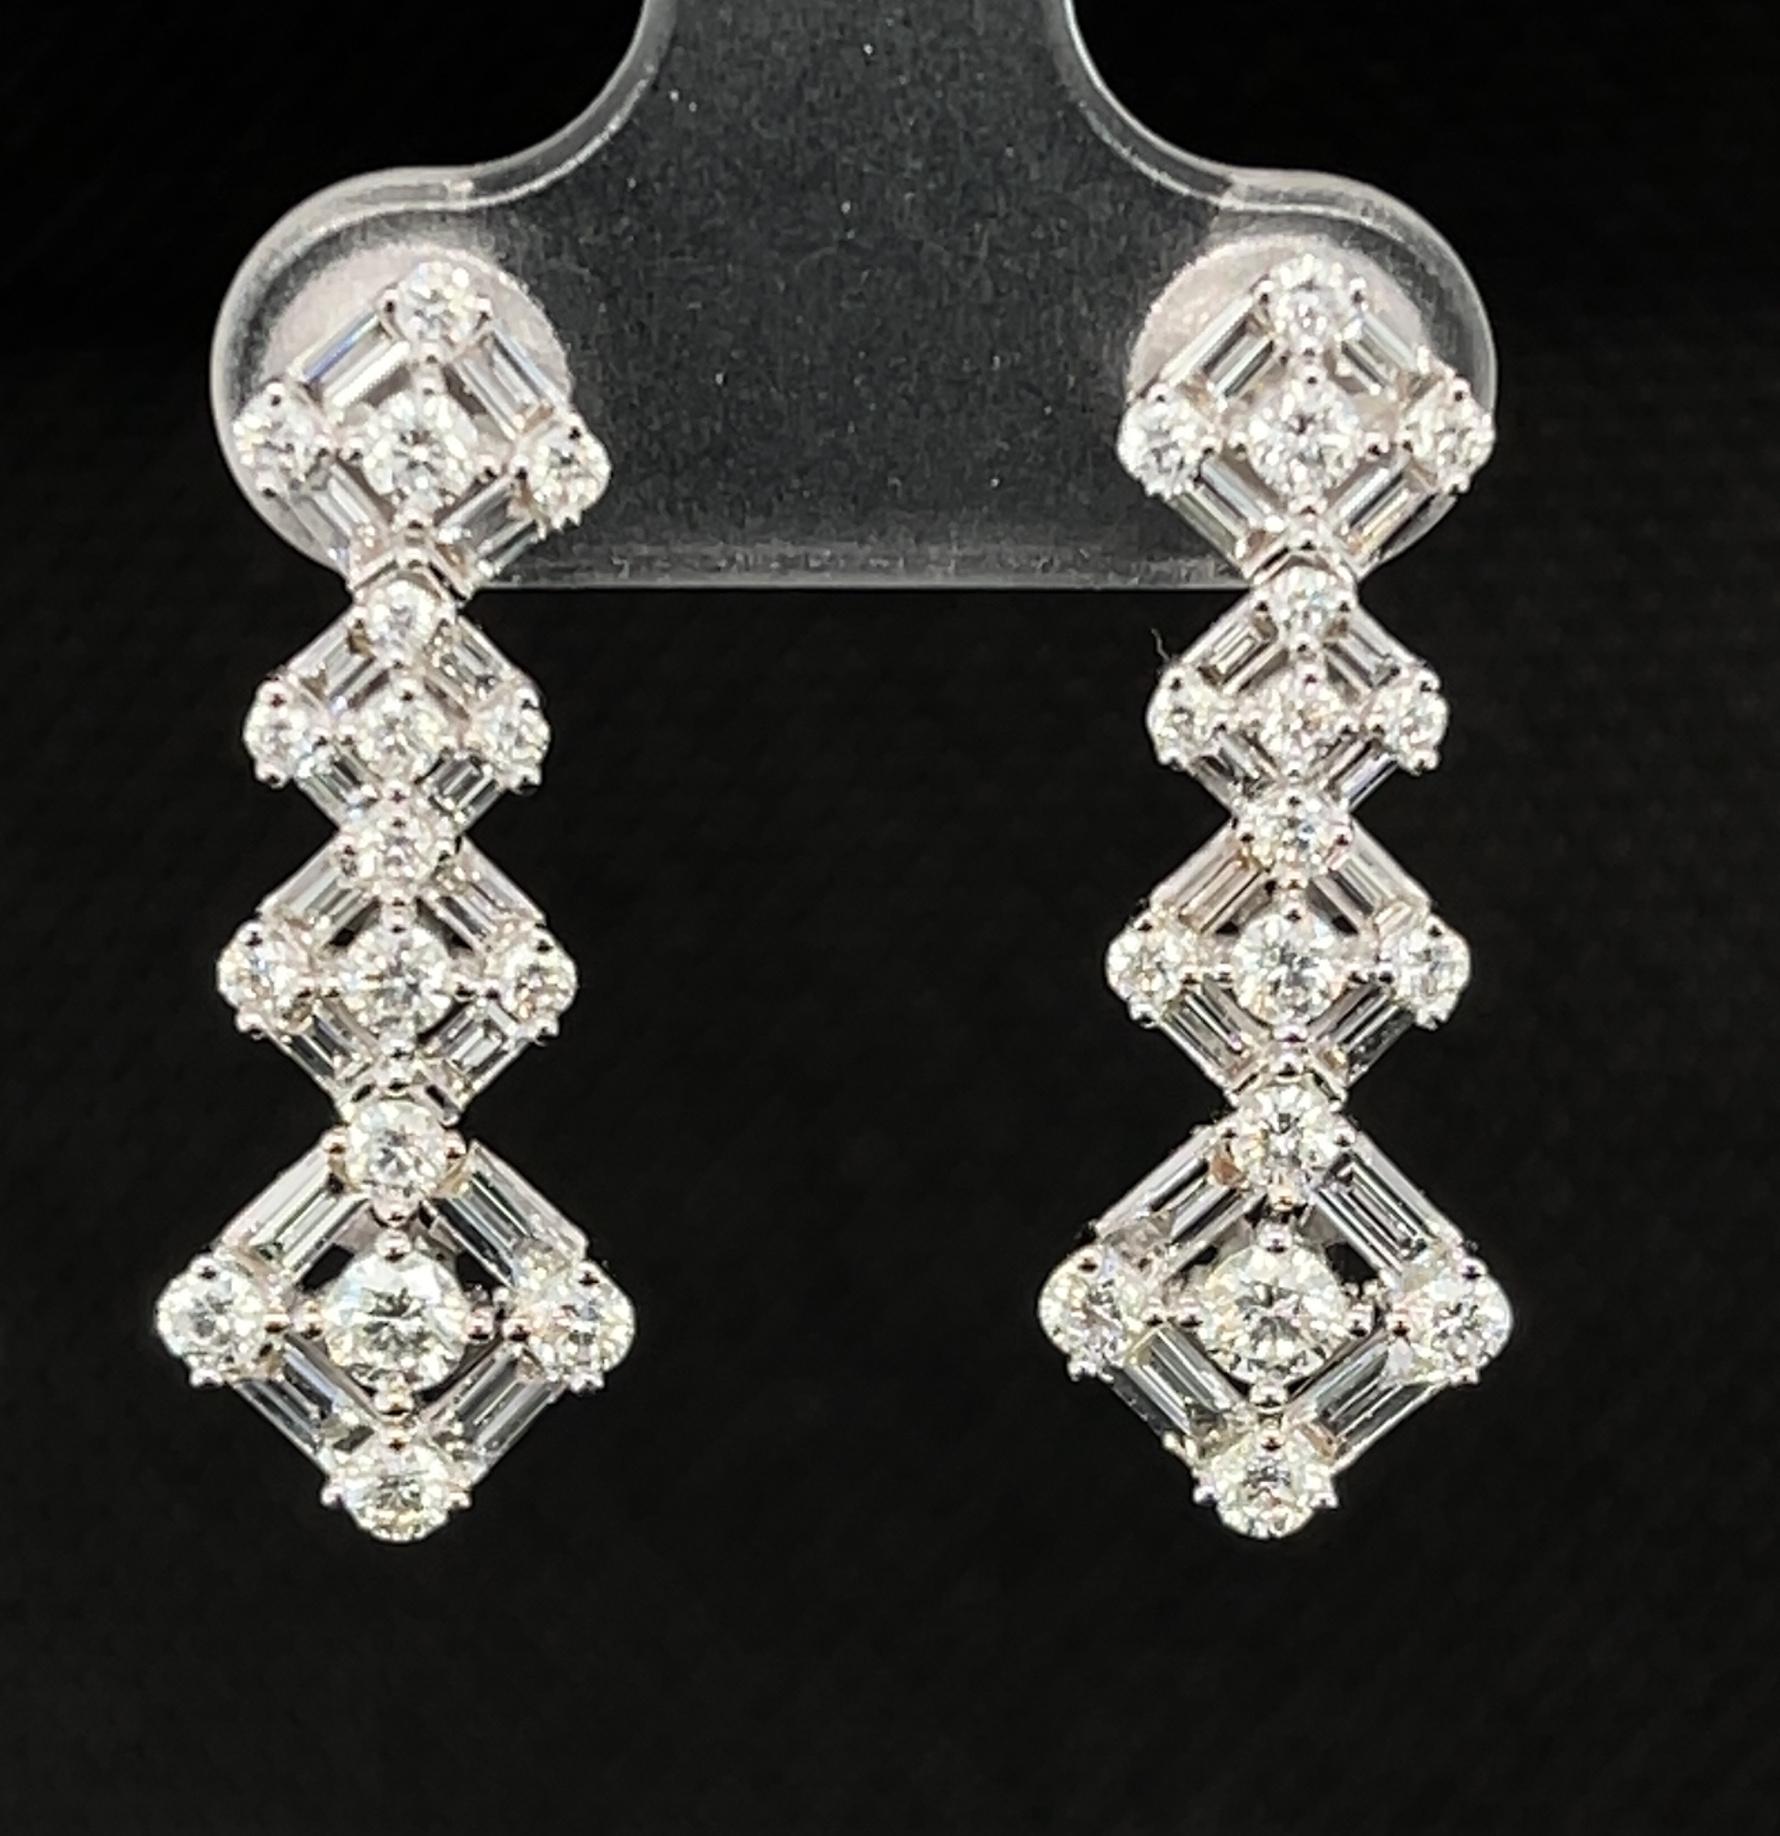 Baguette & round cut diamonds interweave to form these beautiful, dangling earrings. They are a fresh, geometric design that are as modern as they are classic. Sixty-six diamonds weighing a total of 1.83 carats are included in these stunning